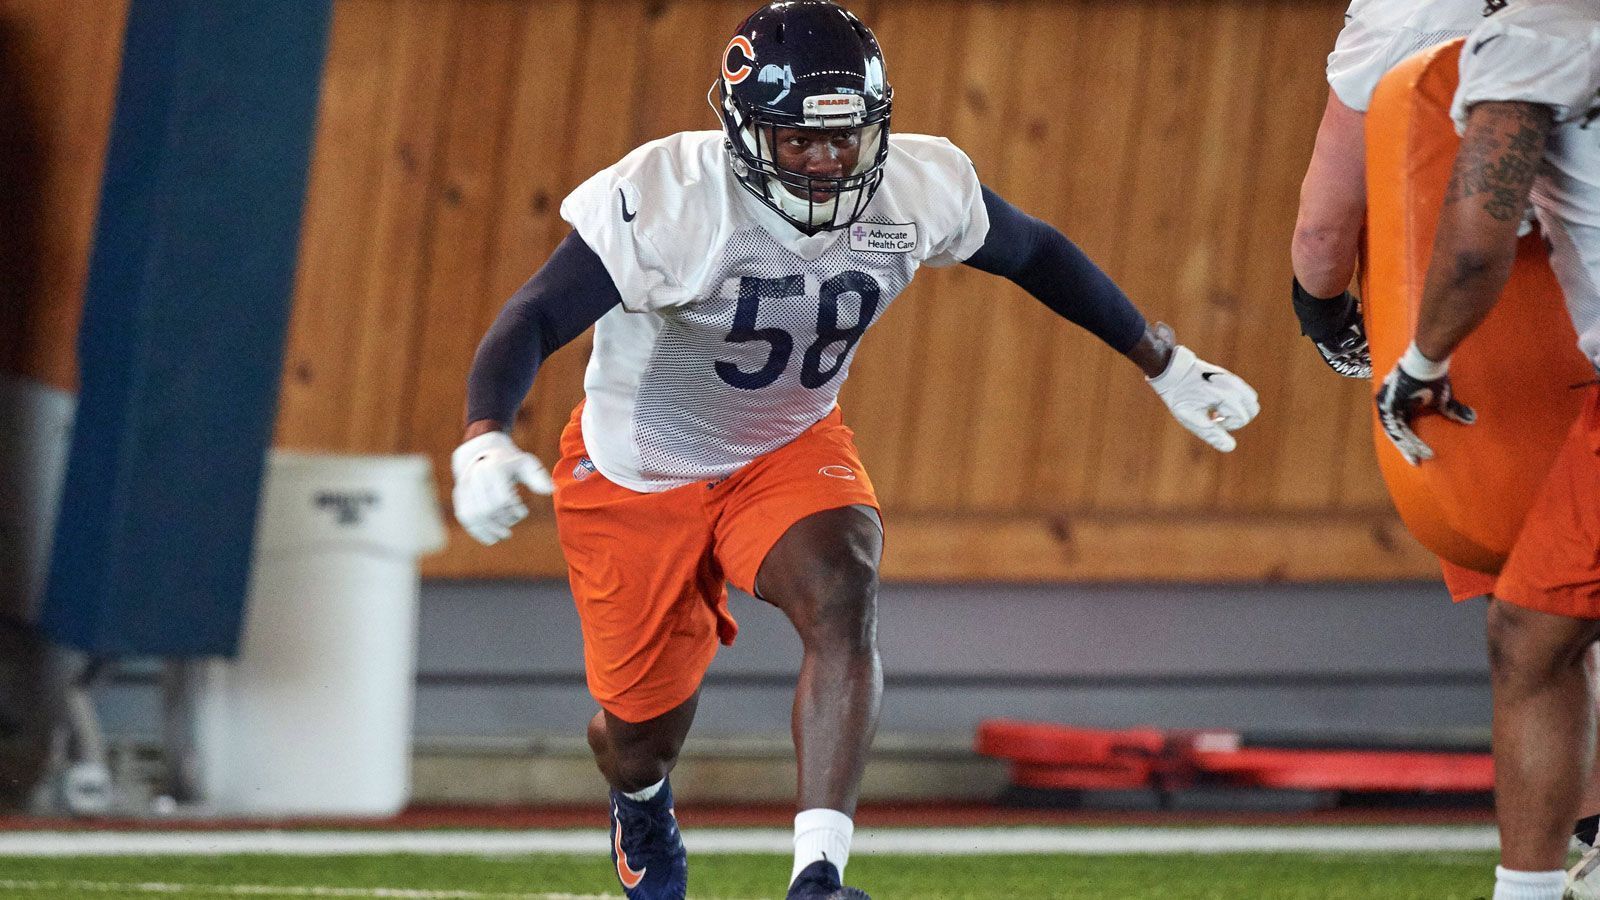 
                <strong>Die Top 5 Rookies in Madden 19</strong><br>
                Platz 4: Roquan Smith, Linebacker, Chicago Bears: 81
              